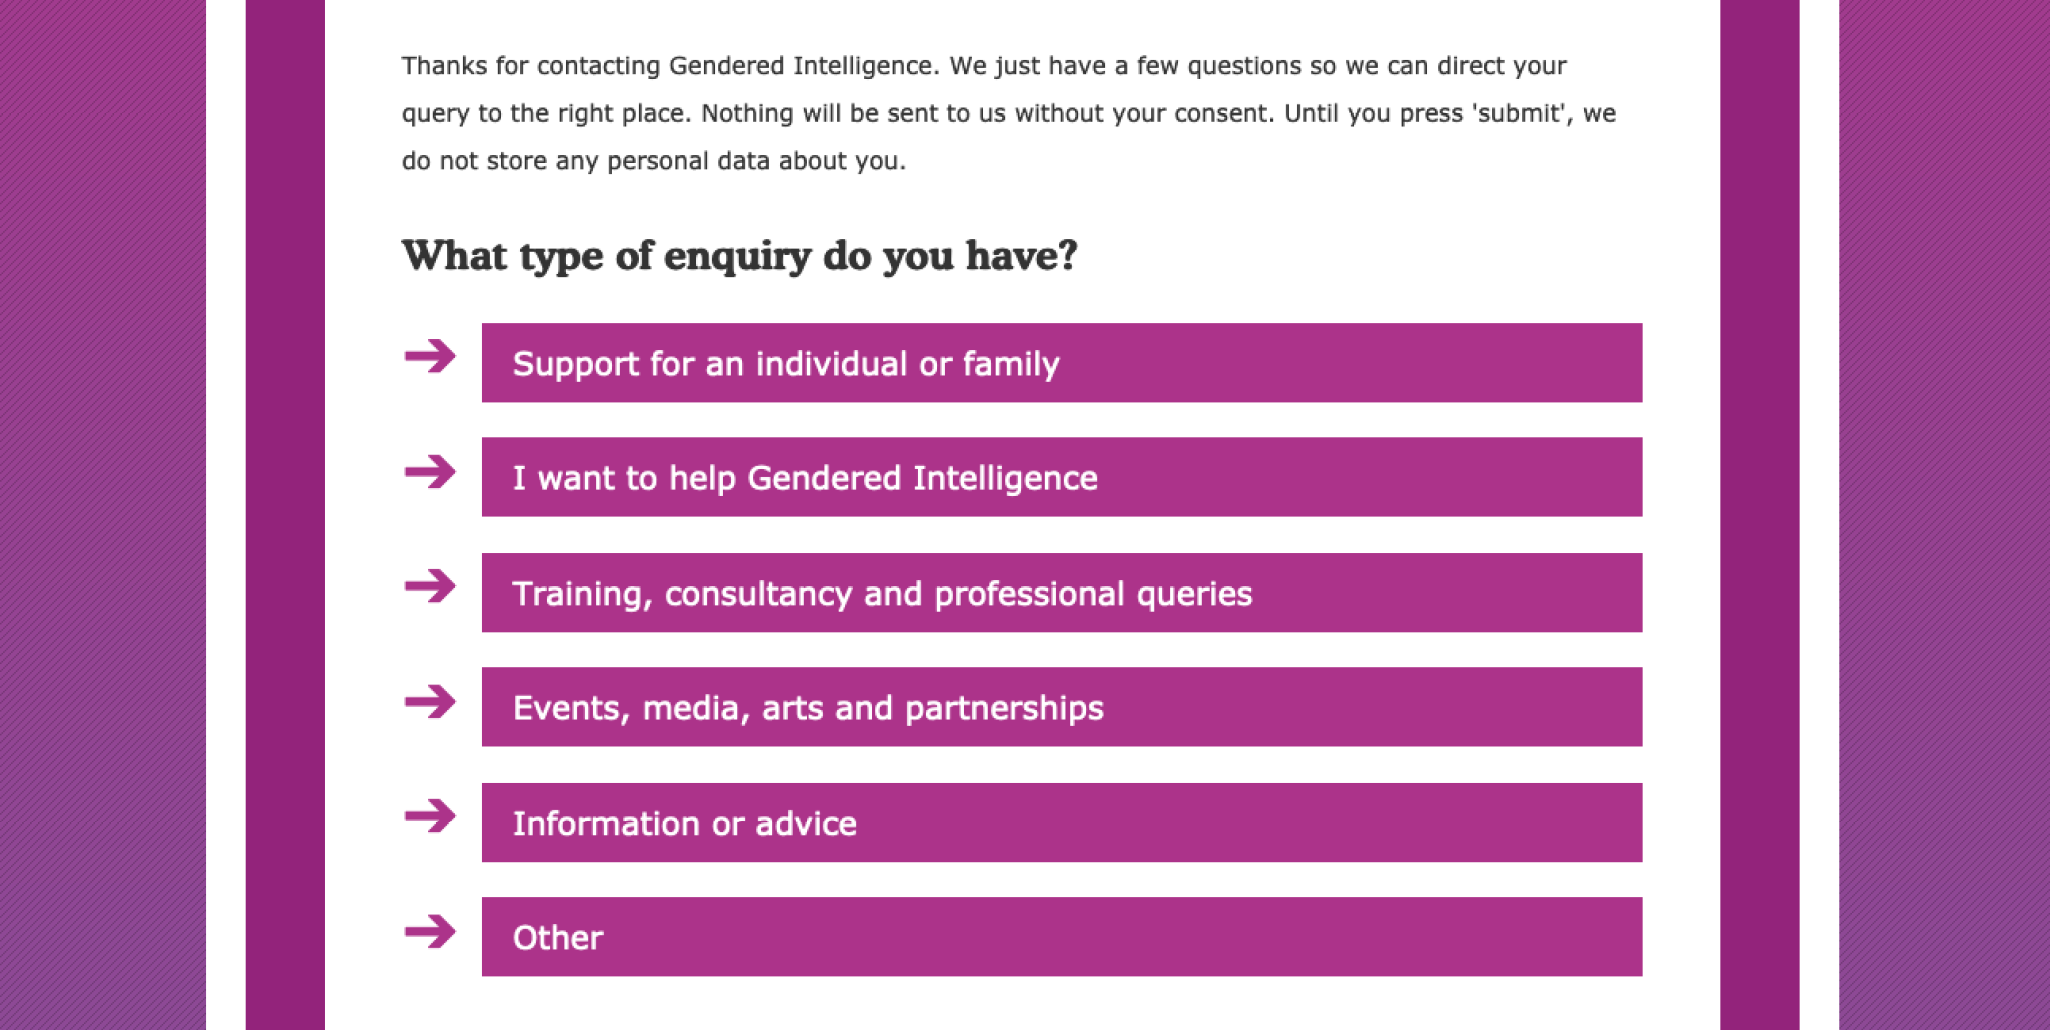 A screenshot showing Gendered Intelligence's rearranged contact page powered by EnquiryWitch